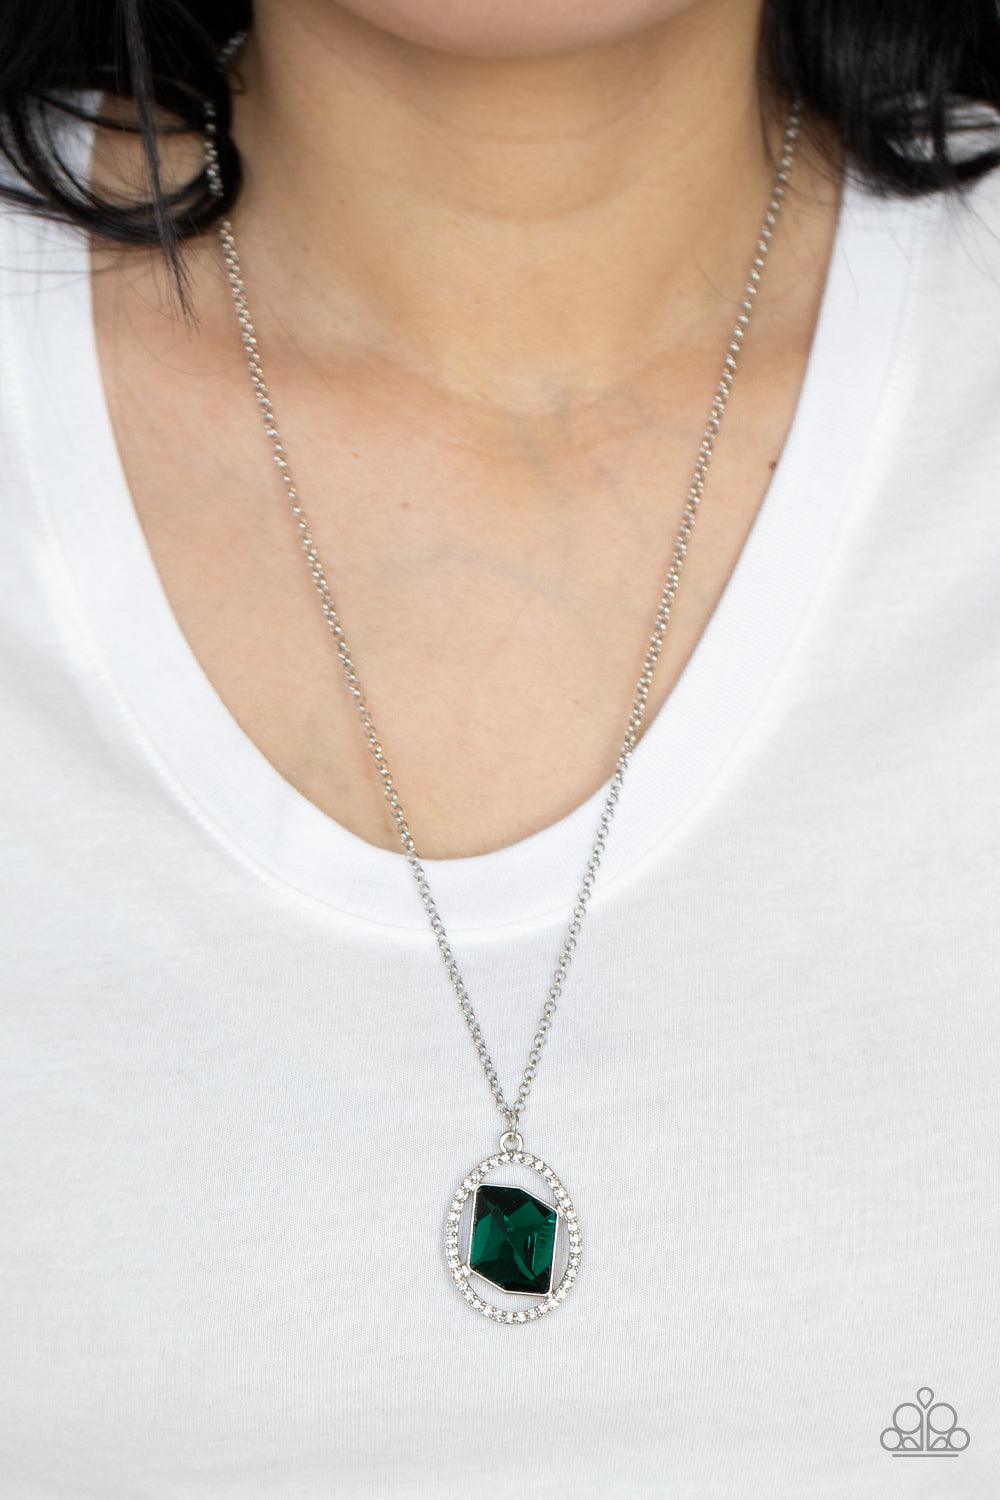 Undiluted Dazzle Green Necklace - Jewelry by Bretta